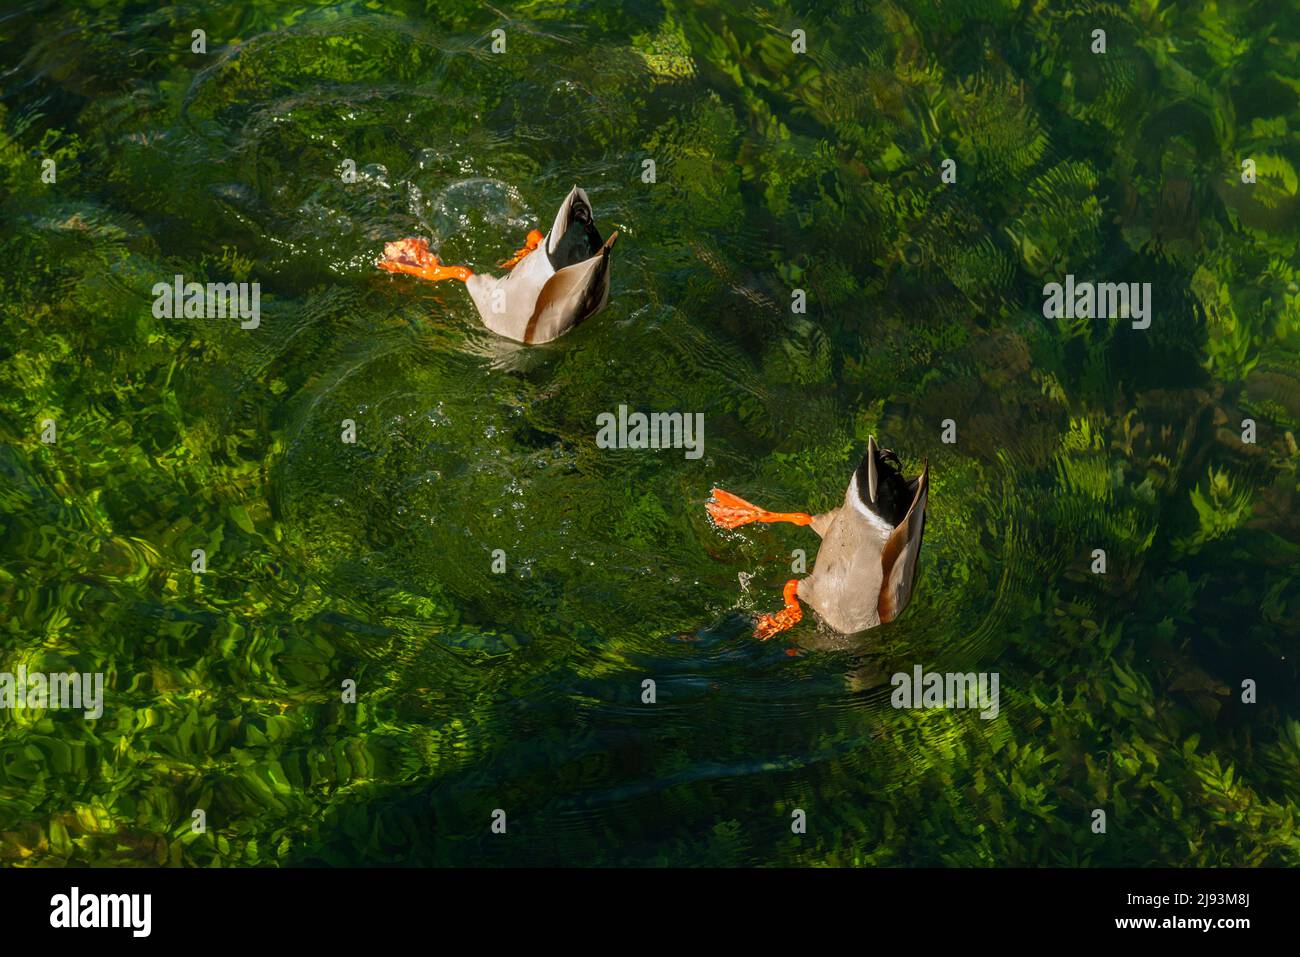 An elevated view of two ducks upended over a fresh water steam with green seaweed, as they dive for food. Stock Photo